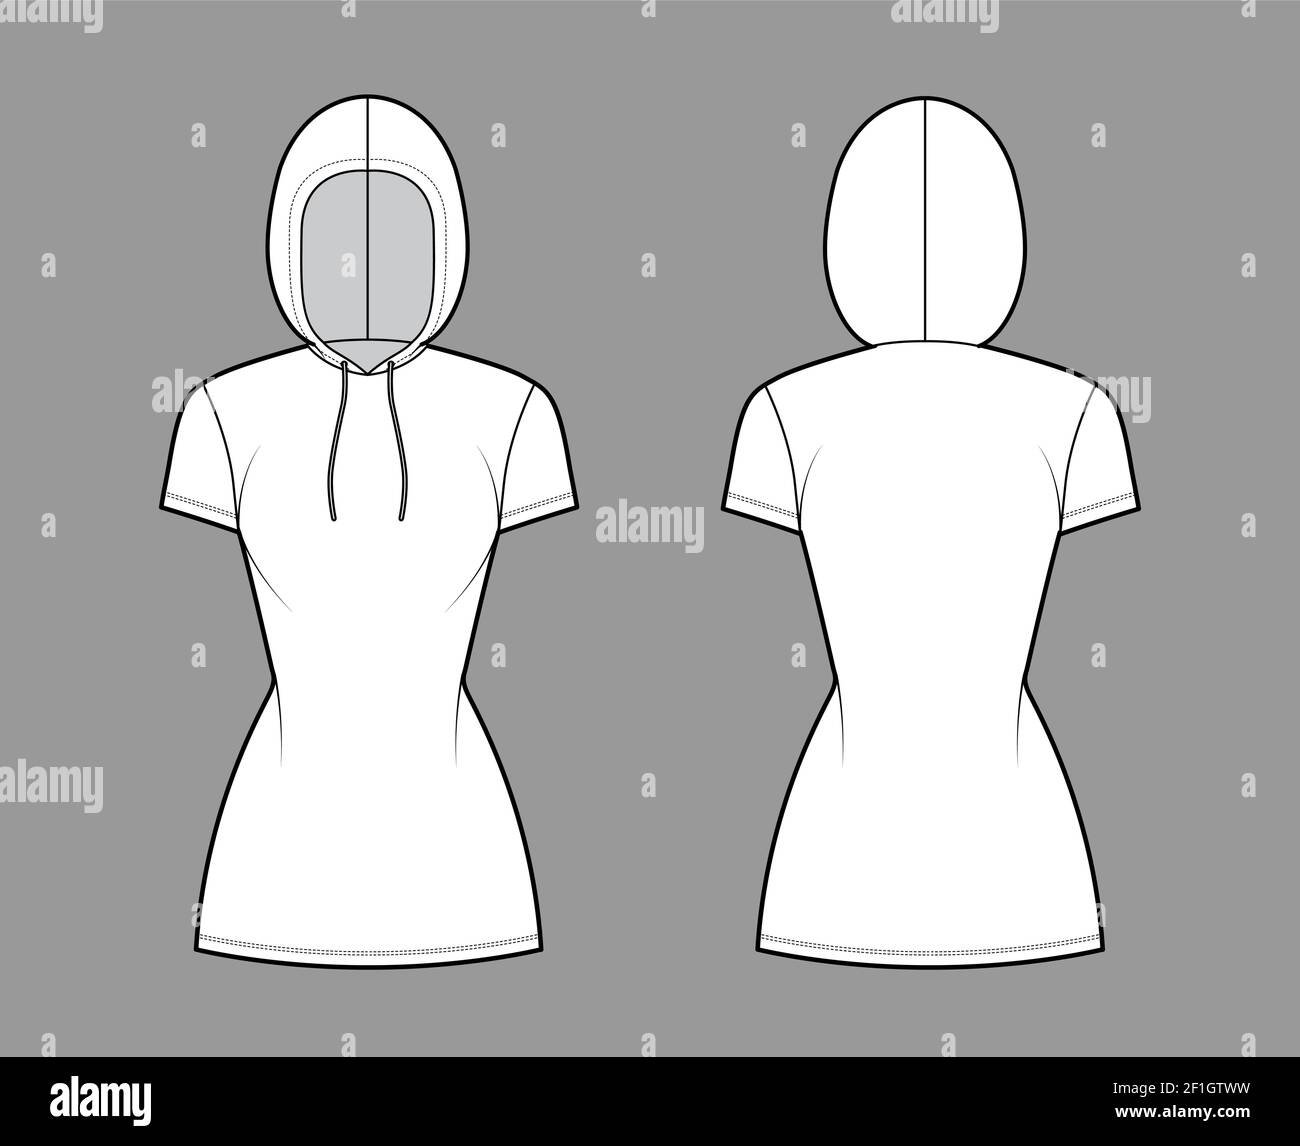 Hoody dress technical fashion illustration with short sleeves, mini length, fitted body, Pencil fullness. Flat sweater apparel template front, back, white color style. Women, men, unisex CAD mockup Stock Vector